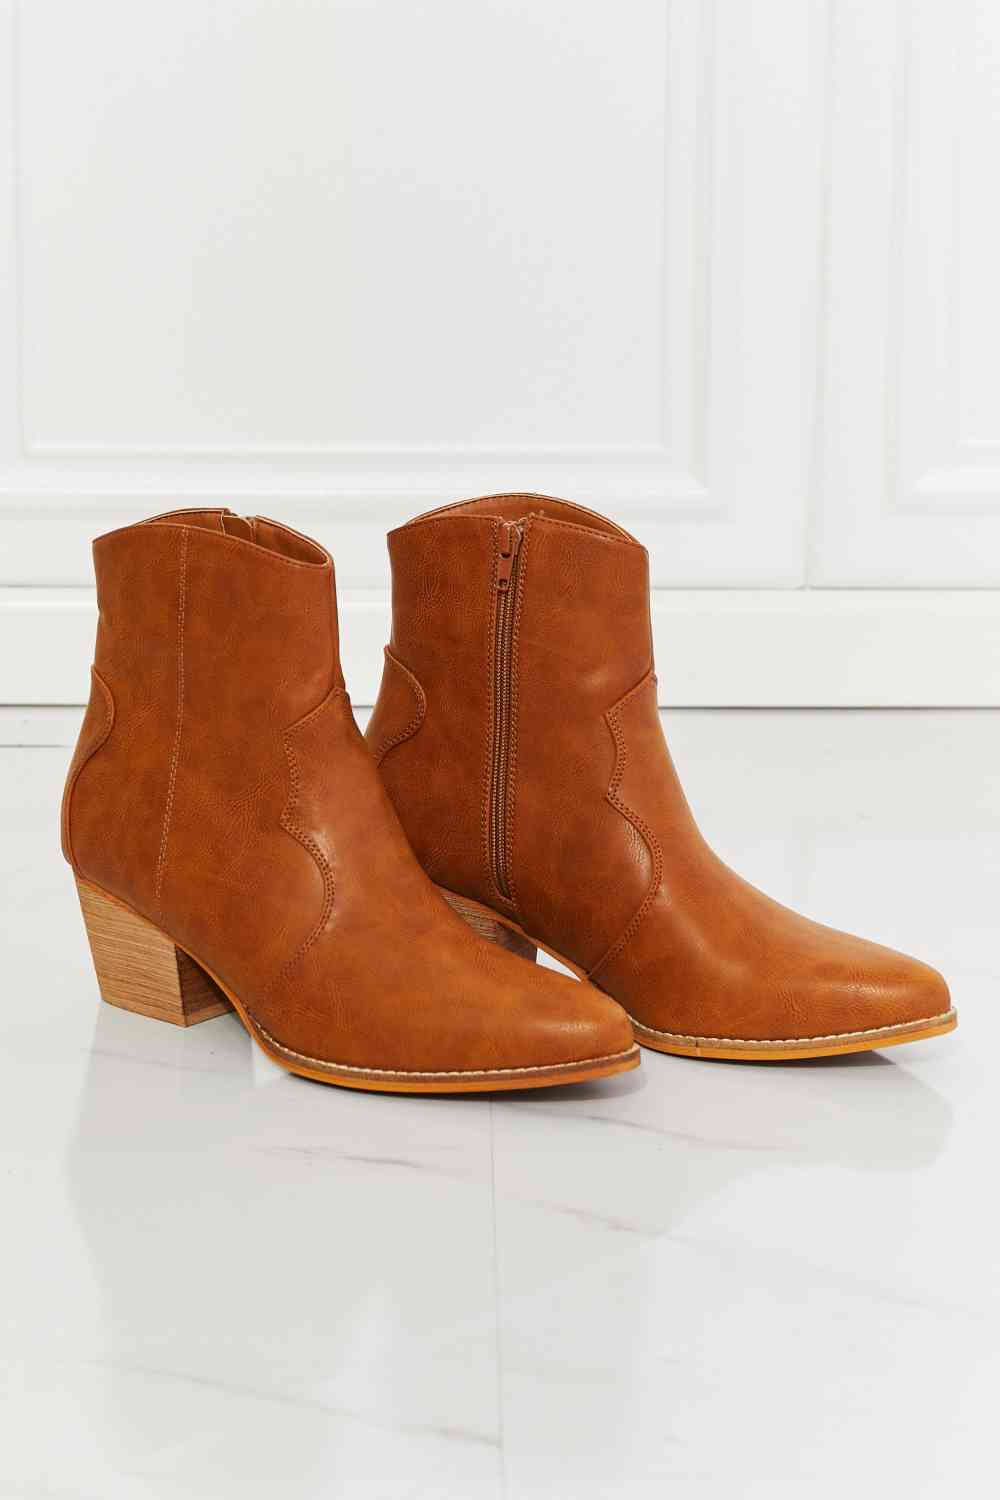 MMShoes Watertower Town Faux Leather Western Ankle Boots in Ochre